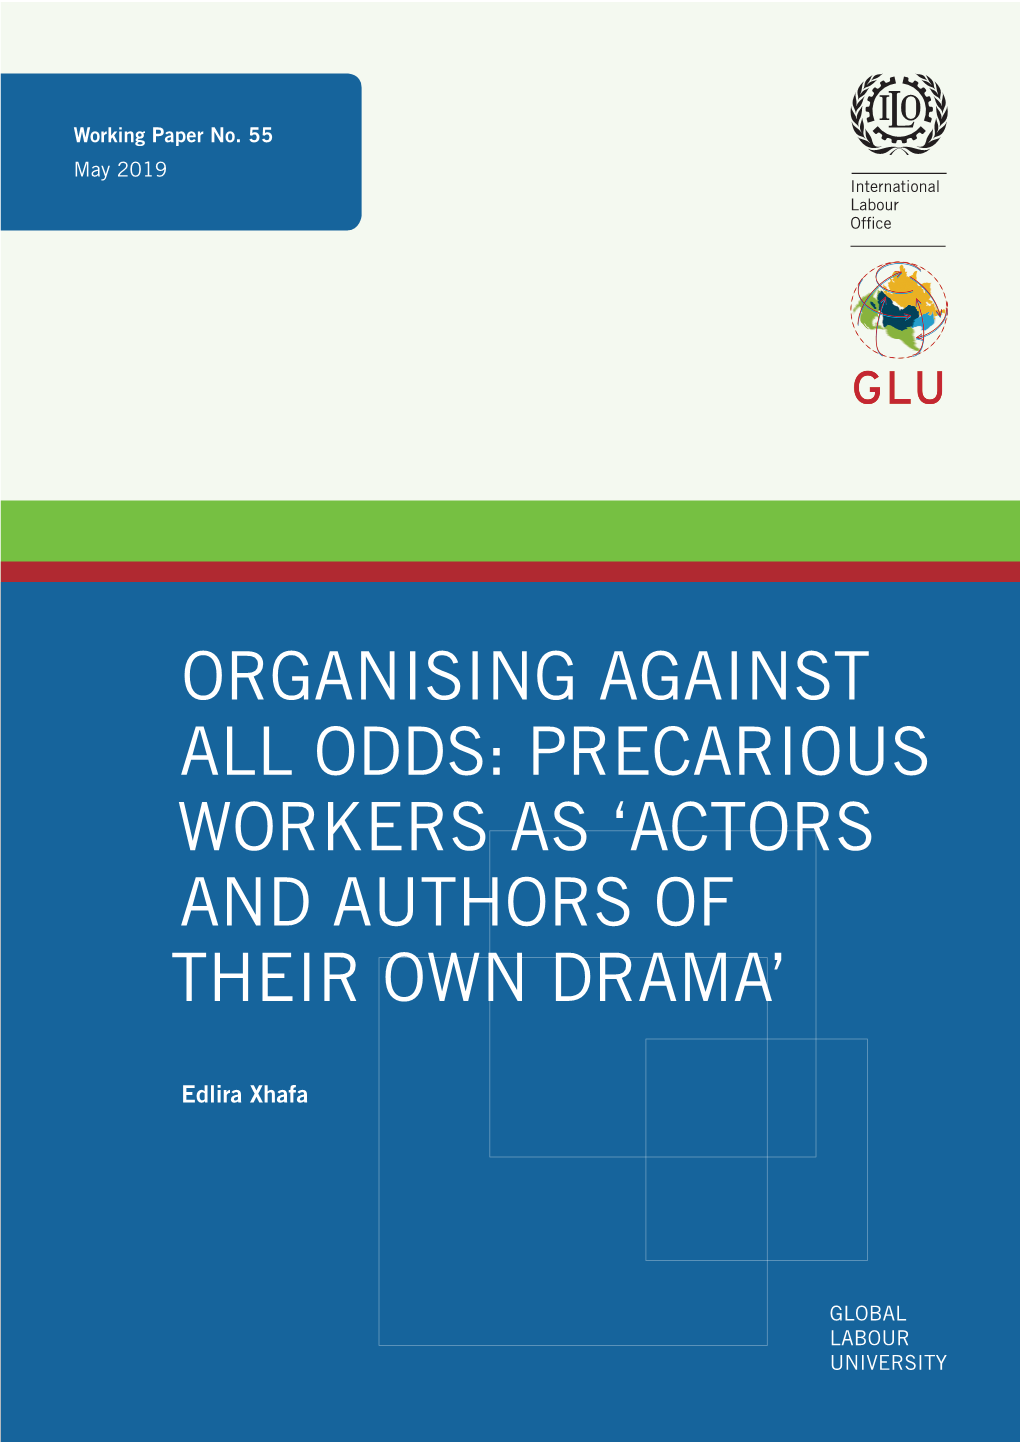 Organising Against All Odds: Precarious Workers As ‘Actors and Authors of Their Own Drama’